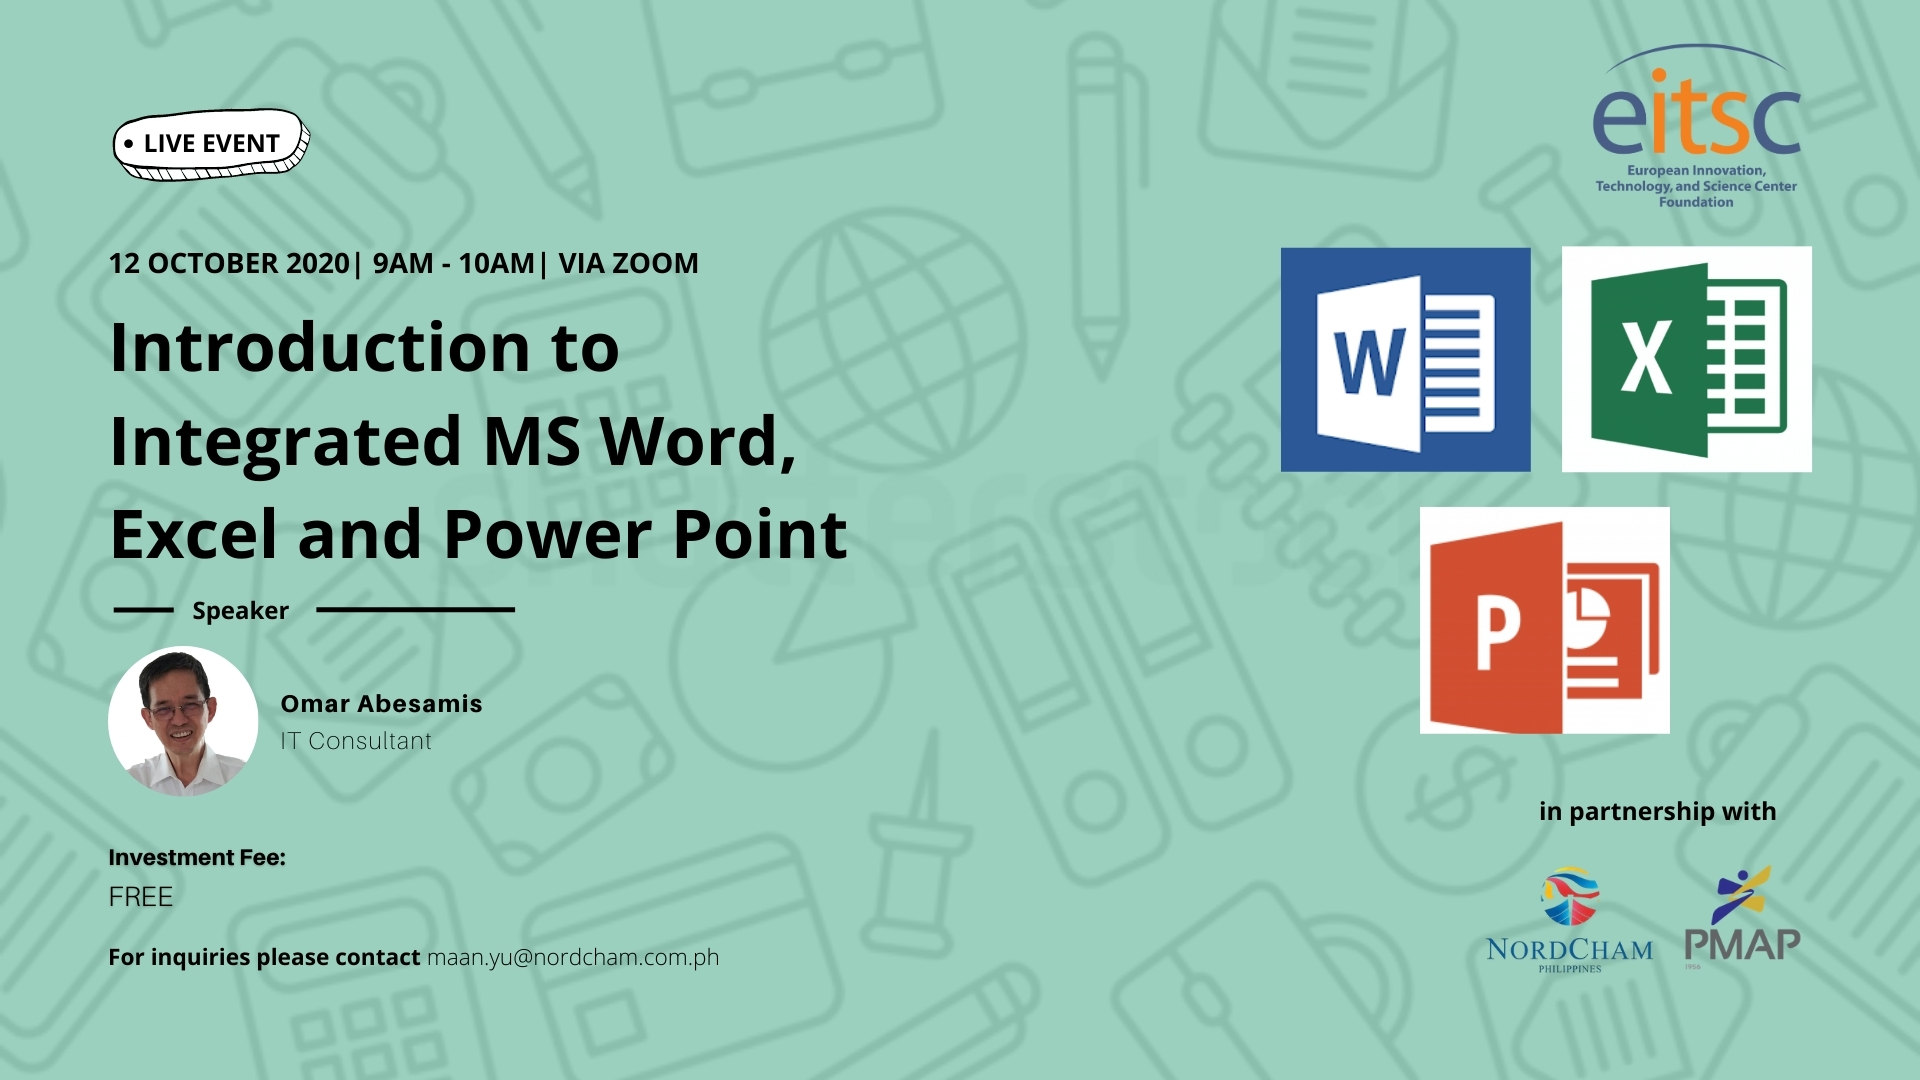 microsoft all in word excel and powerpoint free download